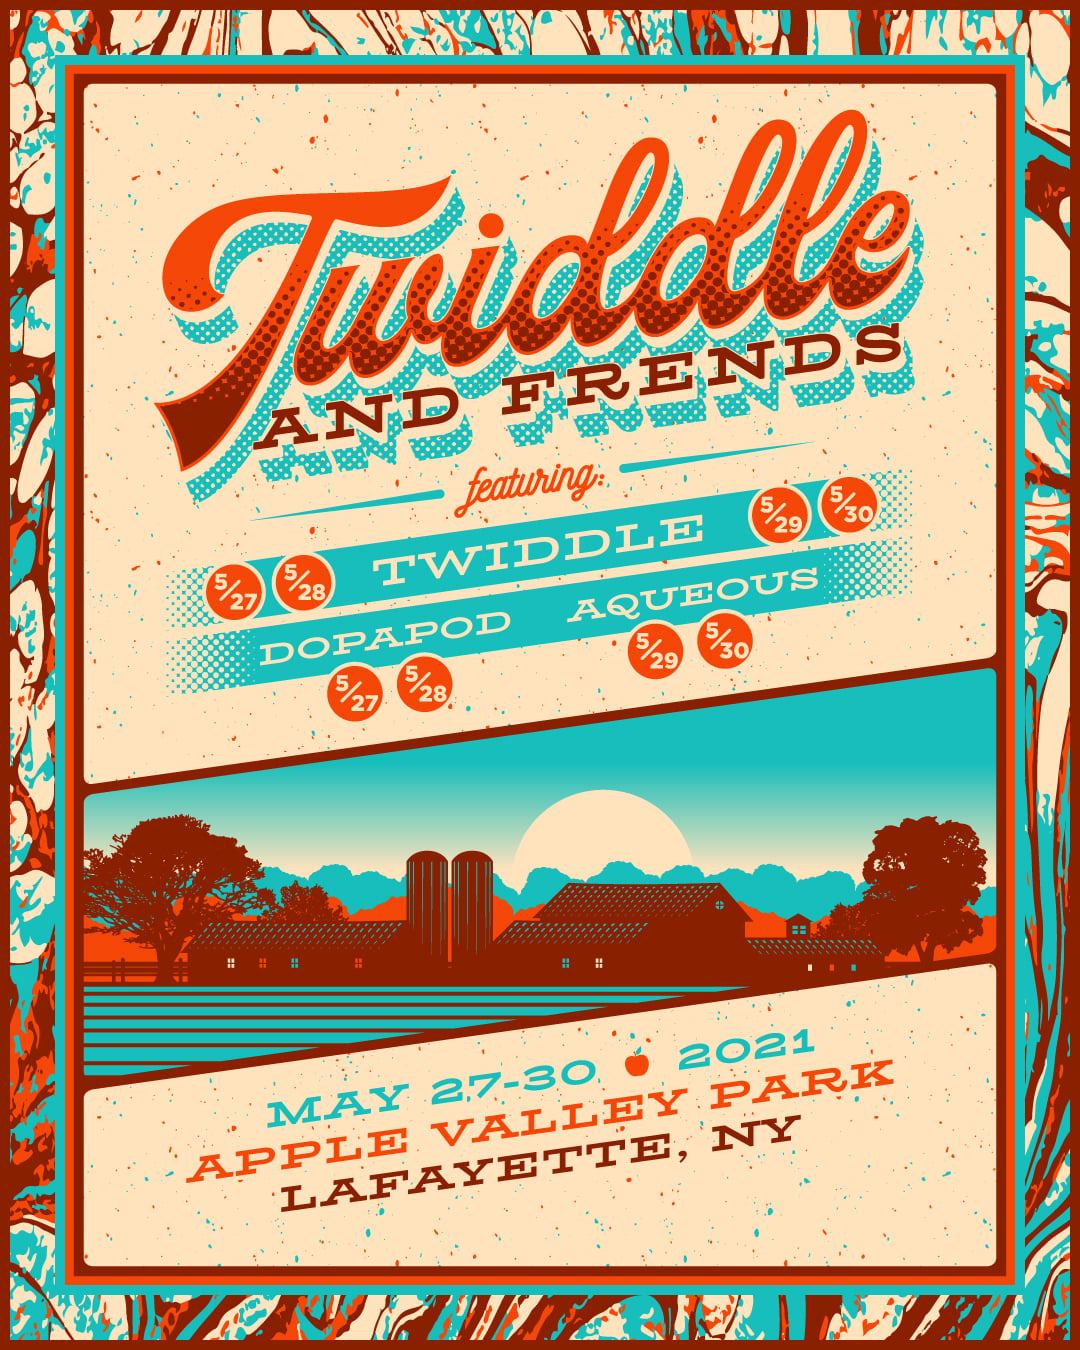 twiddle and frends